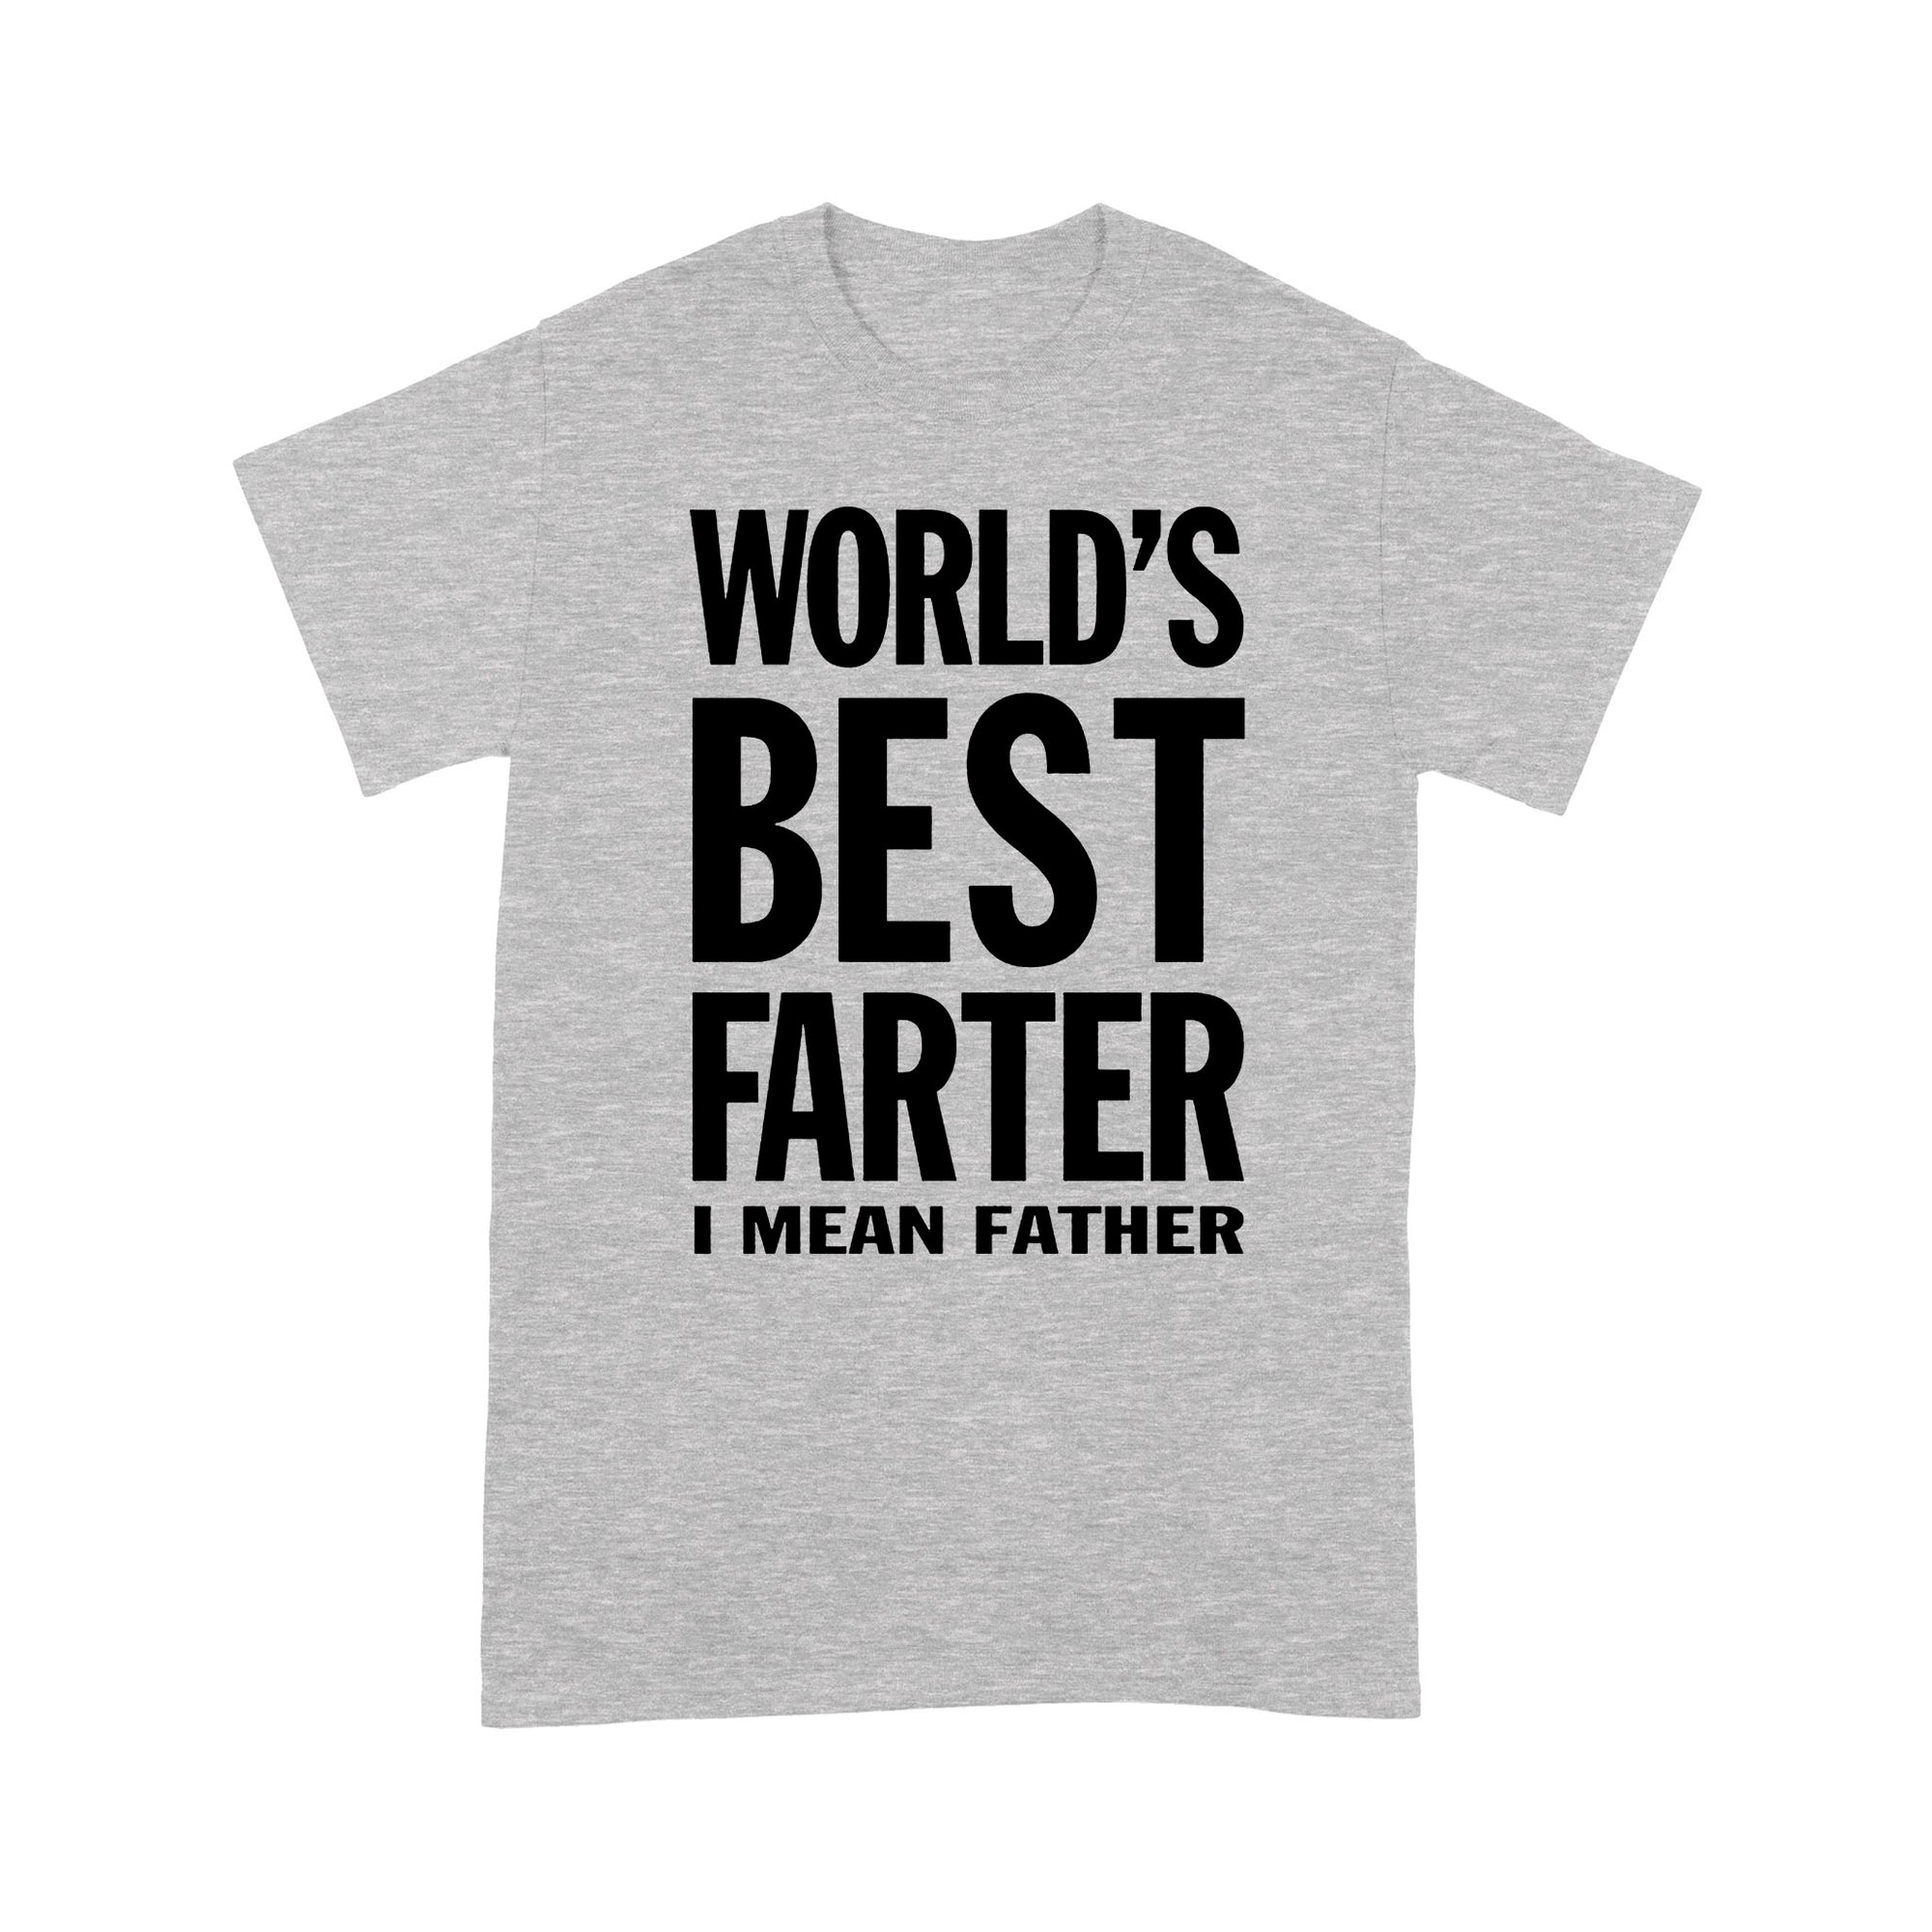 Gift Ideas for Dad World's Best Farter I Mean Father Funny Gift for Dad - Standard T-shirt